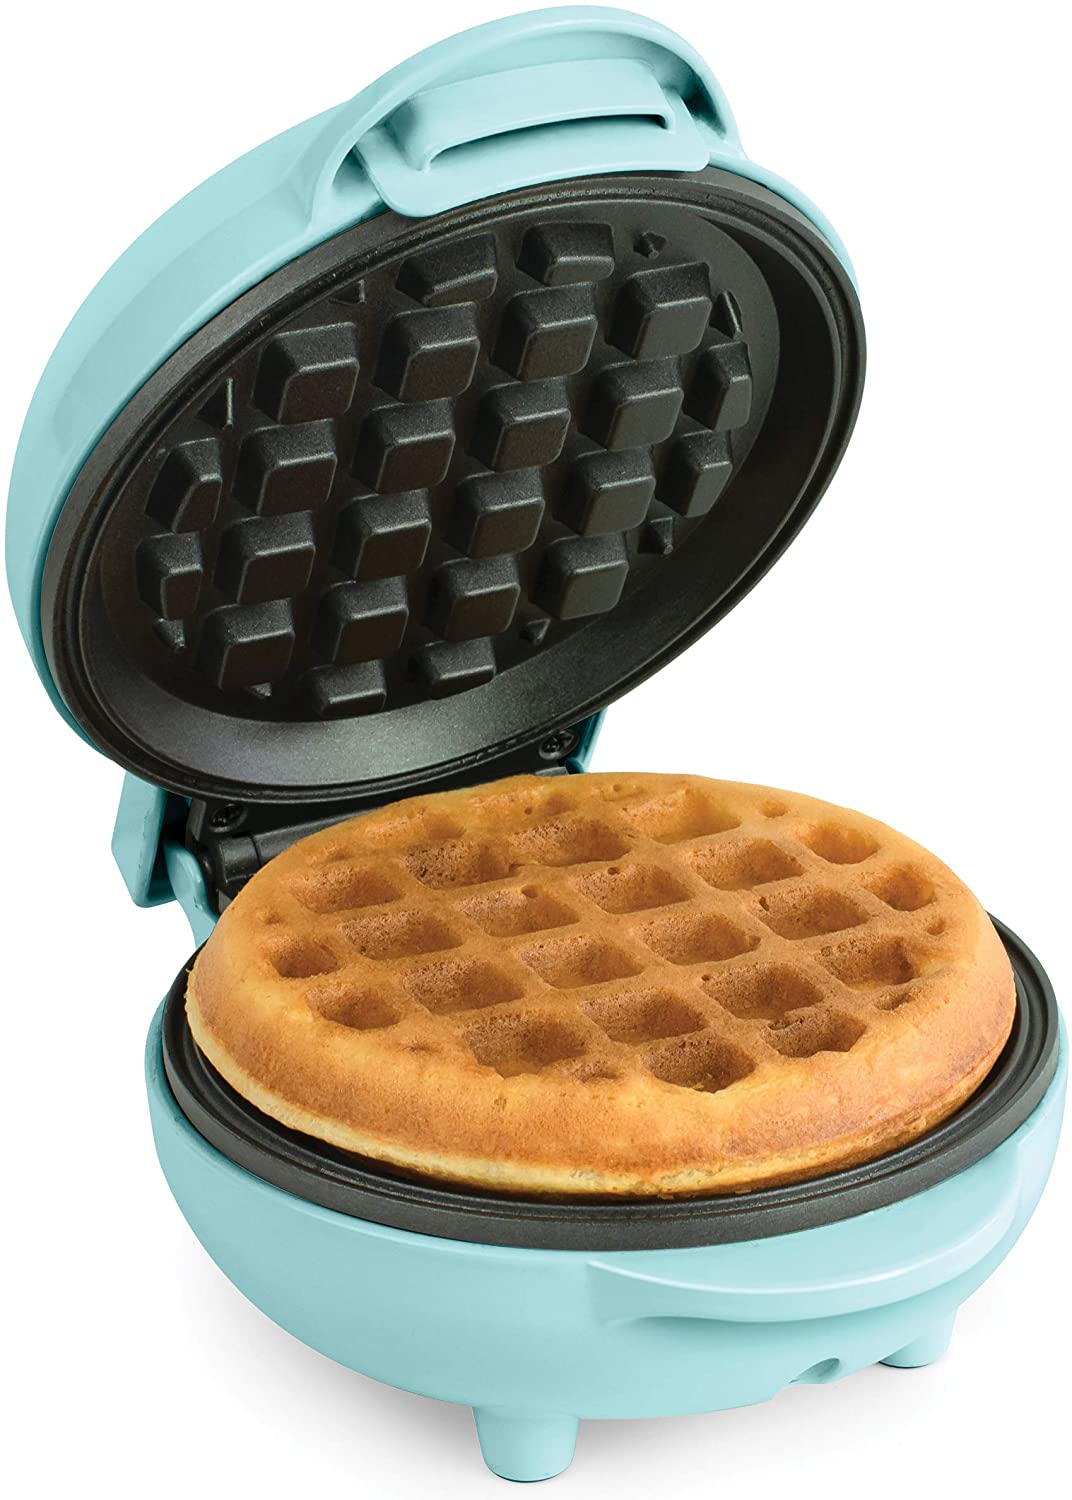 Nostalgia MyMini Sandwich Maker, Teal : Making Grill Cheese